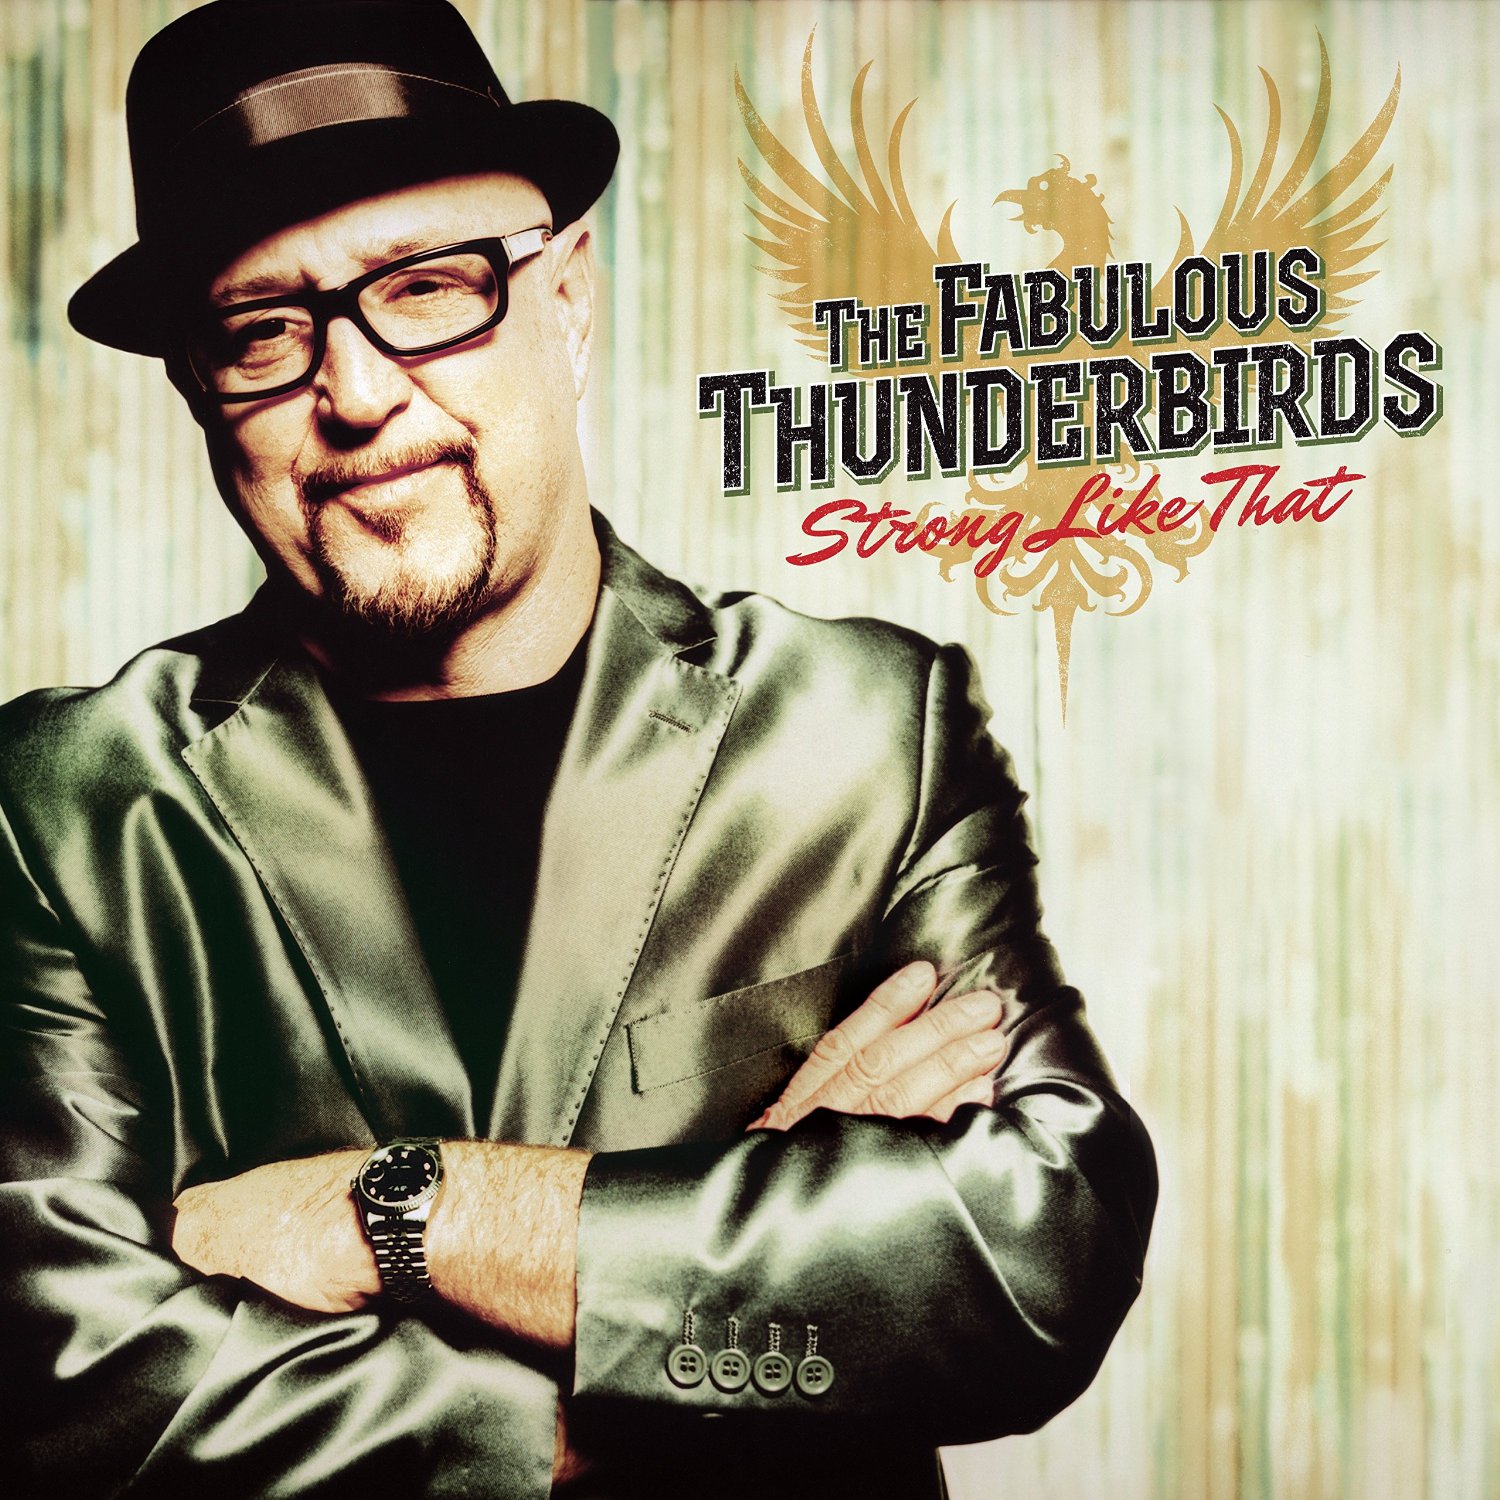 The Fabulous Thunderbirds- Strong Like That (2016) (flac)